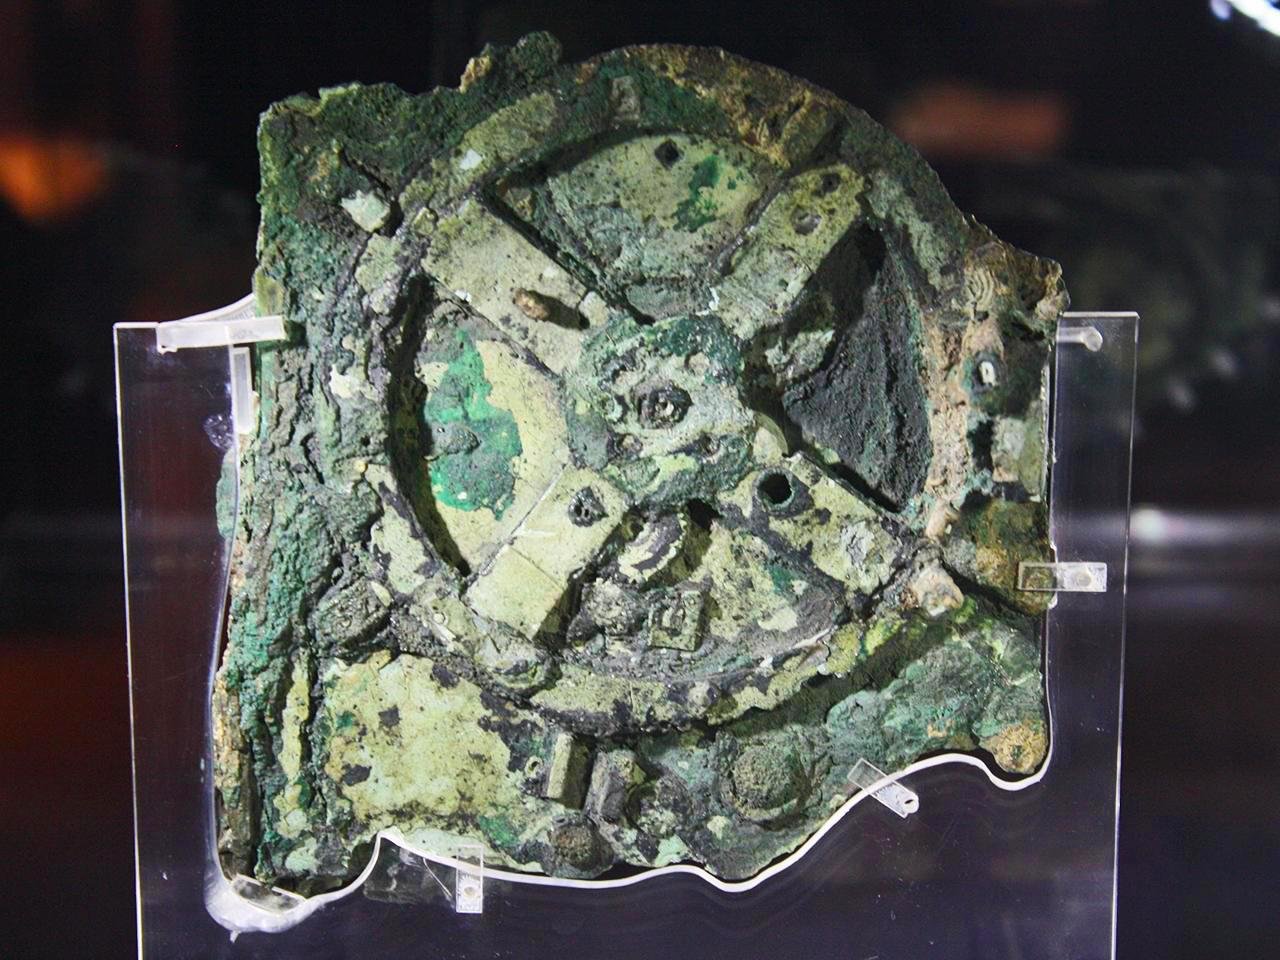 New research reveals the Greek lunar calendar tracking in the Antikythera mechanism